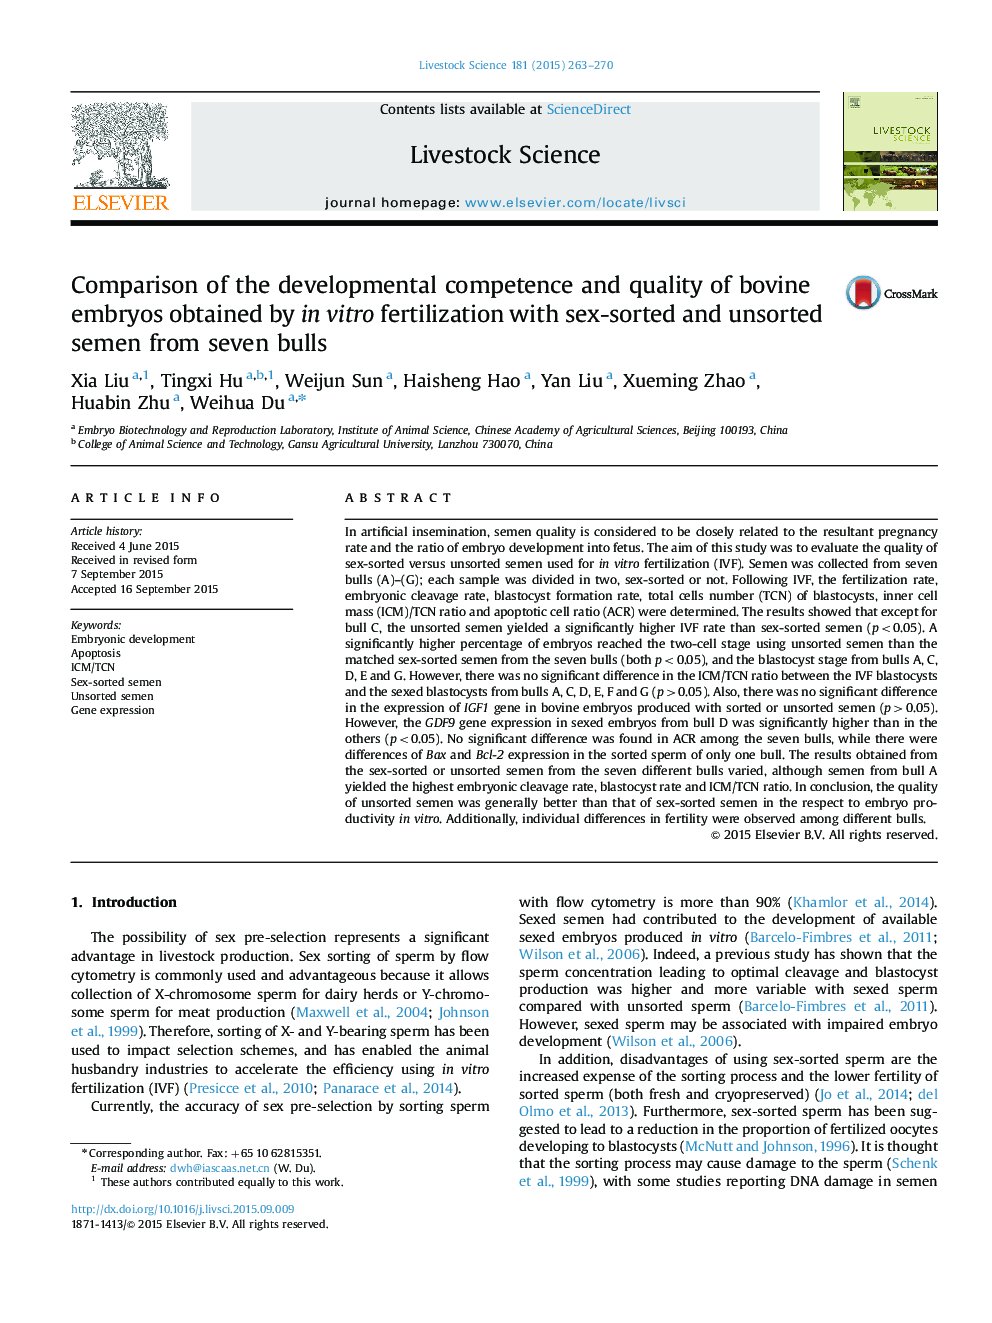 Comparison of the developmental competence and quality of bovine embryos obtained by in vitro fertilization with sex-sorted and unsorted semen from seven bulls